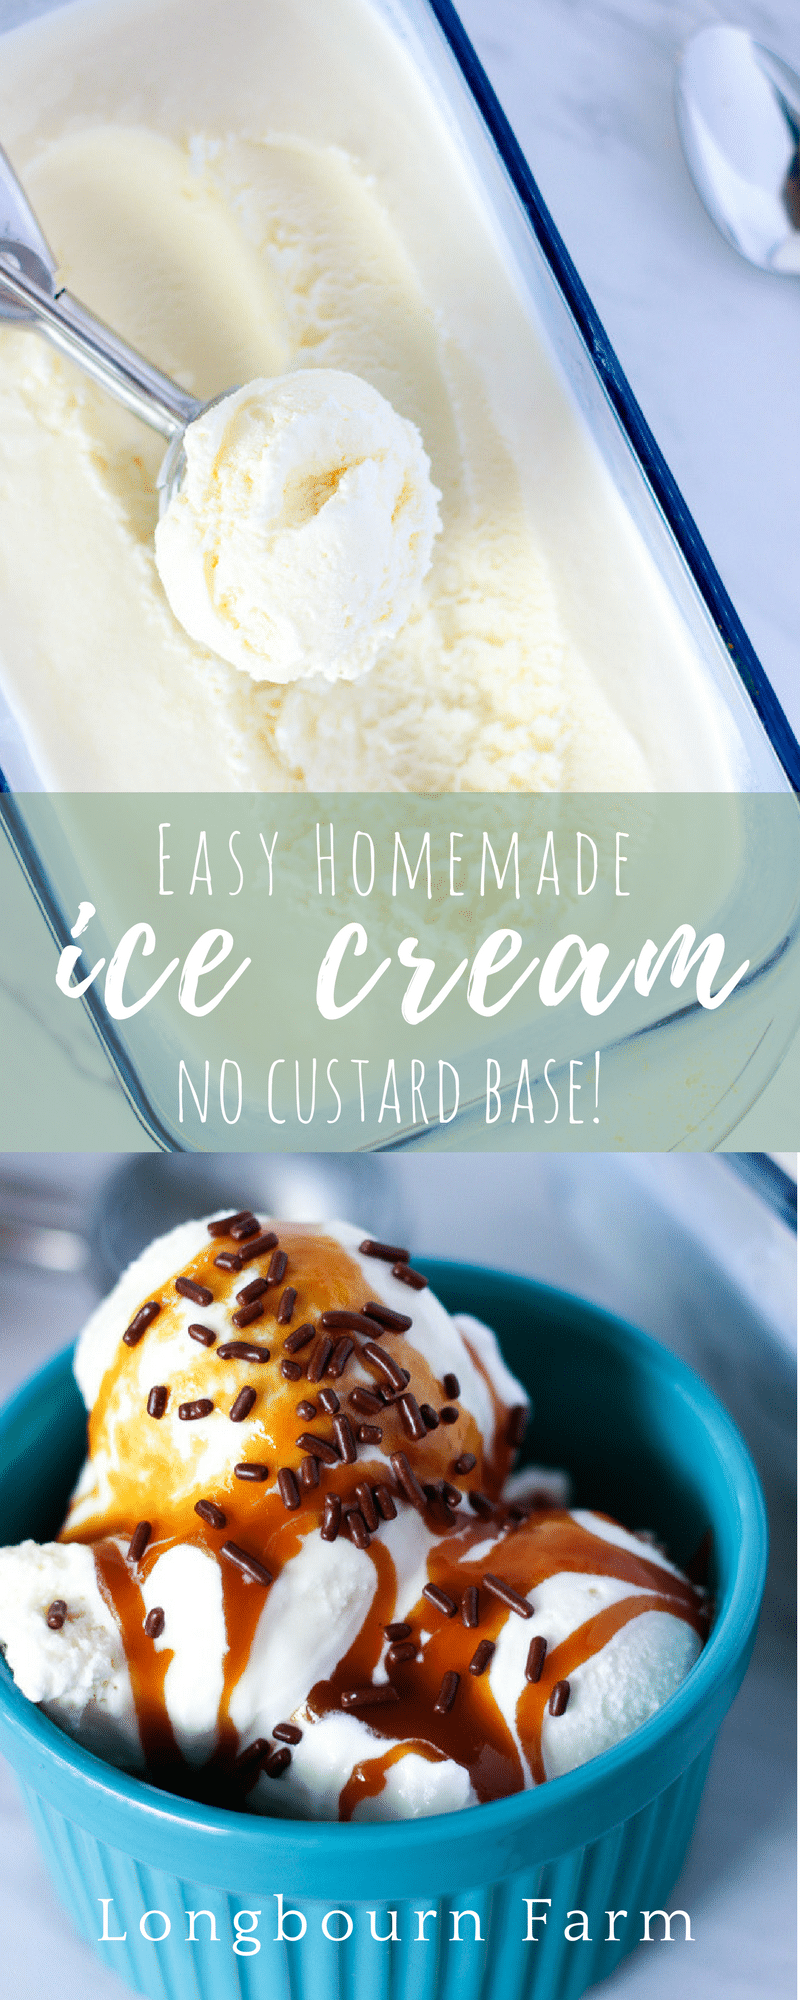 This homemade vanilla ice cream recipe is delicious, creamy, and rich without the hassle of making a custard! Make a batch and cool off today.